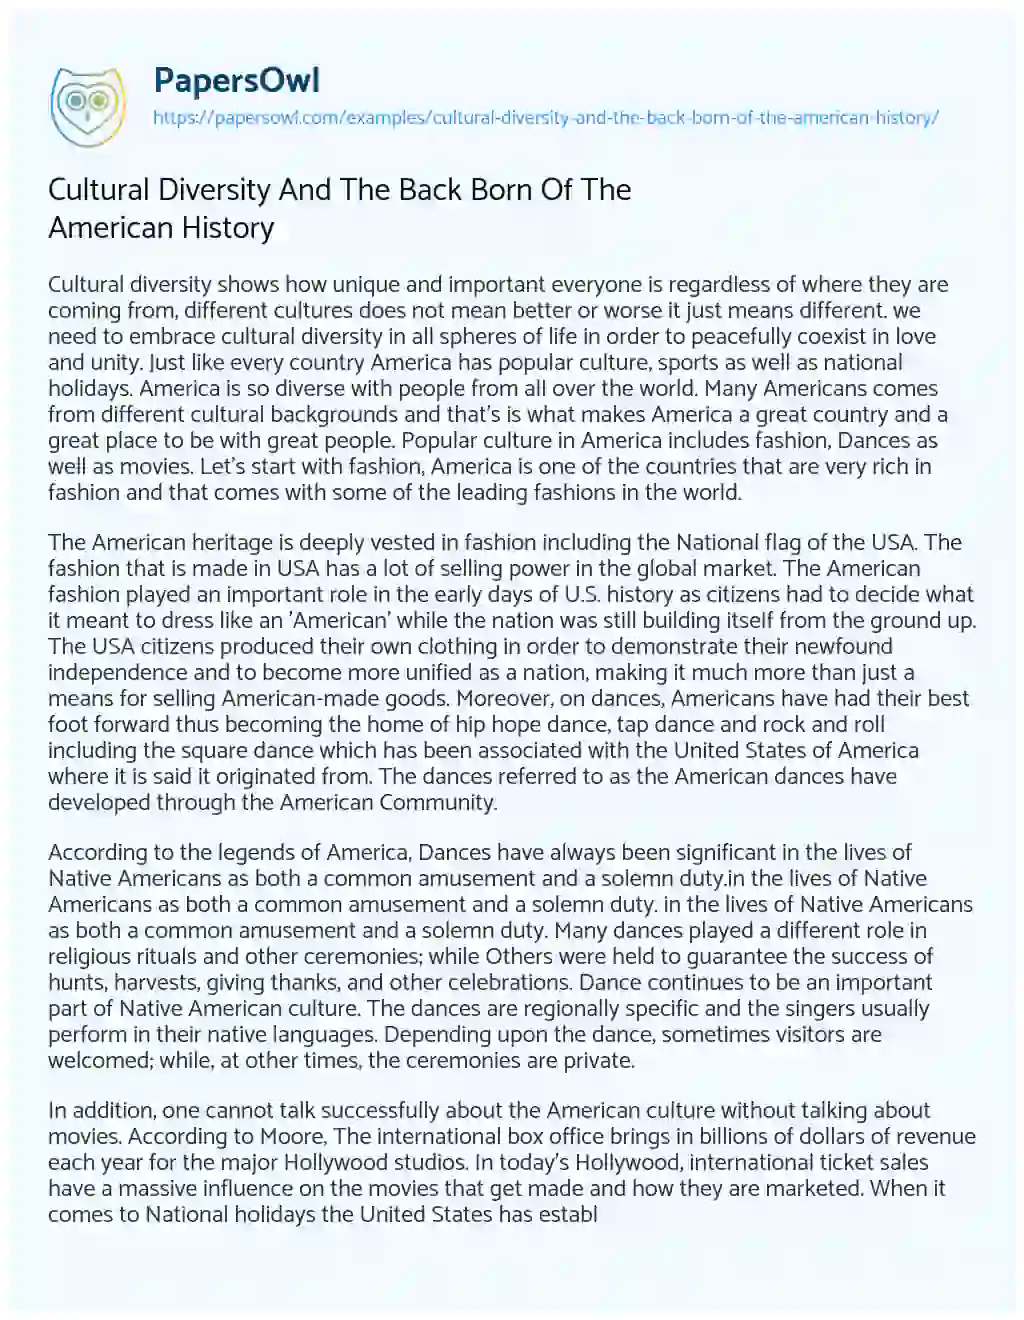 Essay on Cultural Diversity and the Back Born of the American History